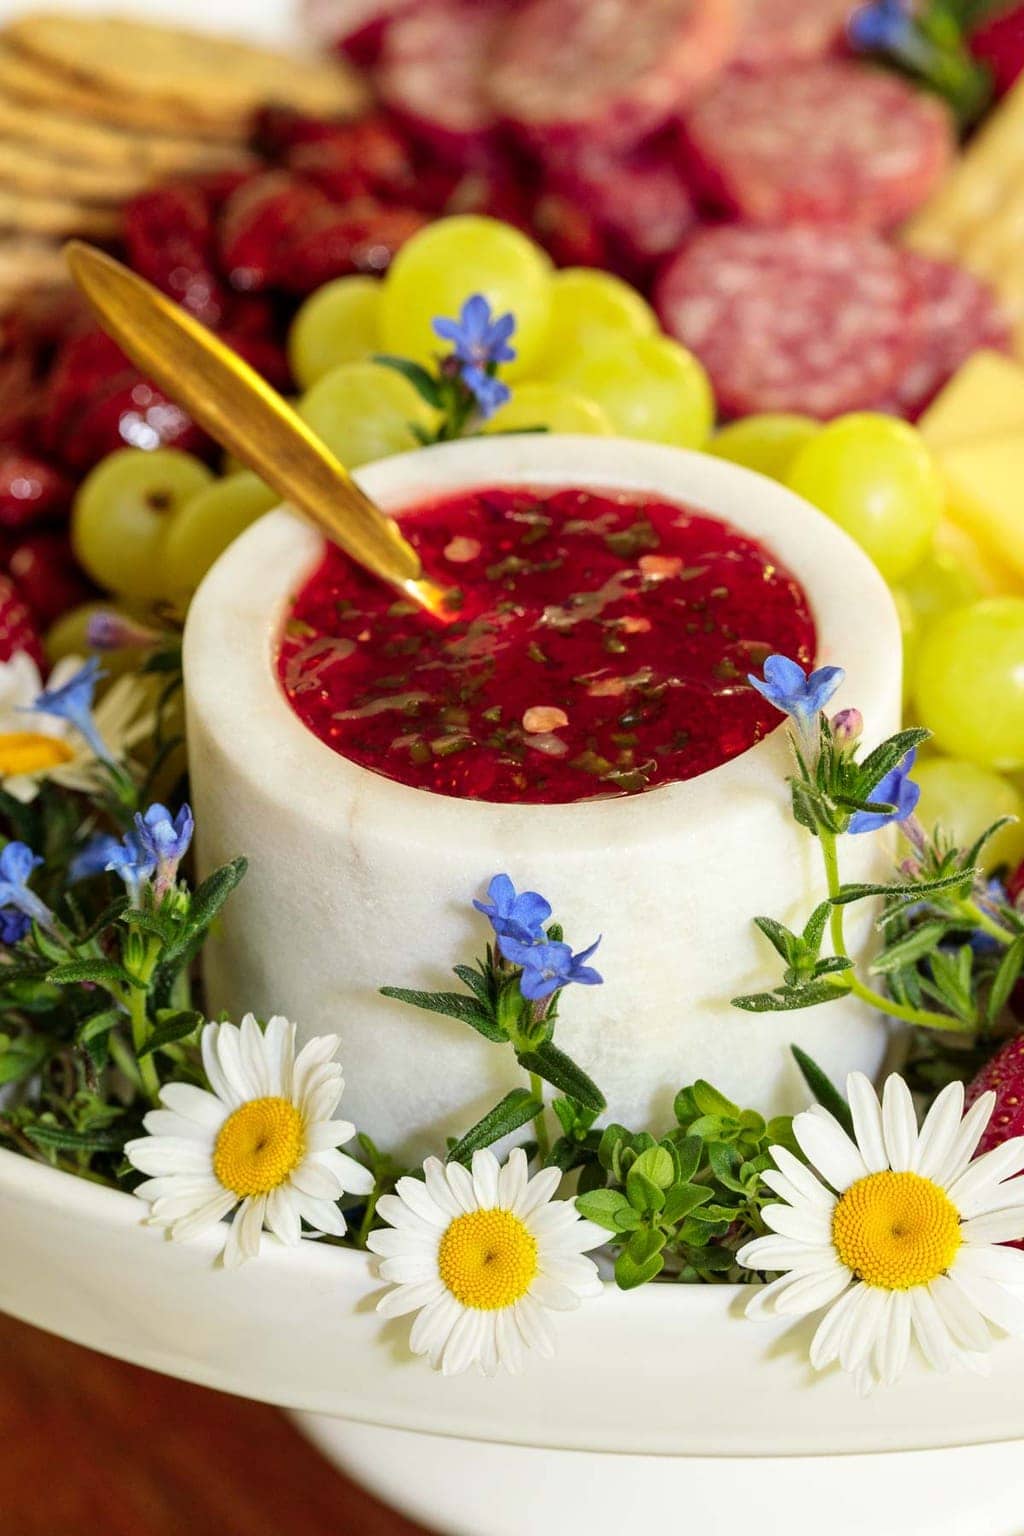 Vertical photo of a white marble bowl of Strawberry Jalapeño Jam on a charcuterie board with flowers in the foreground.